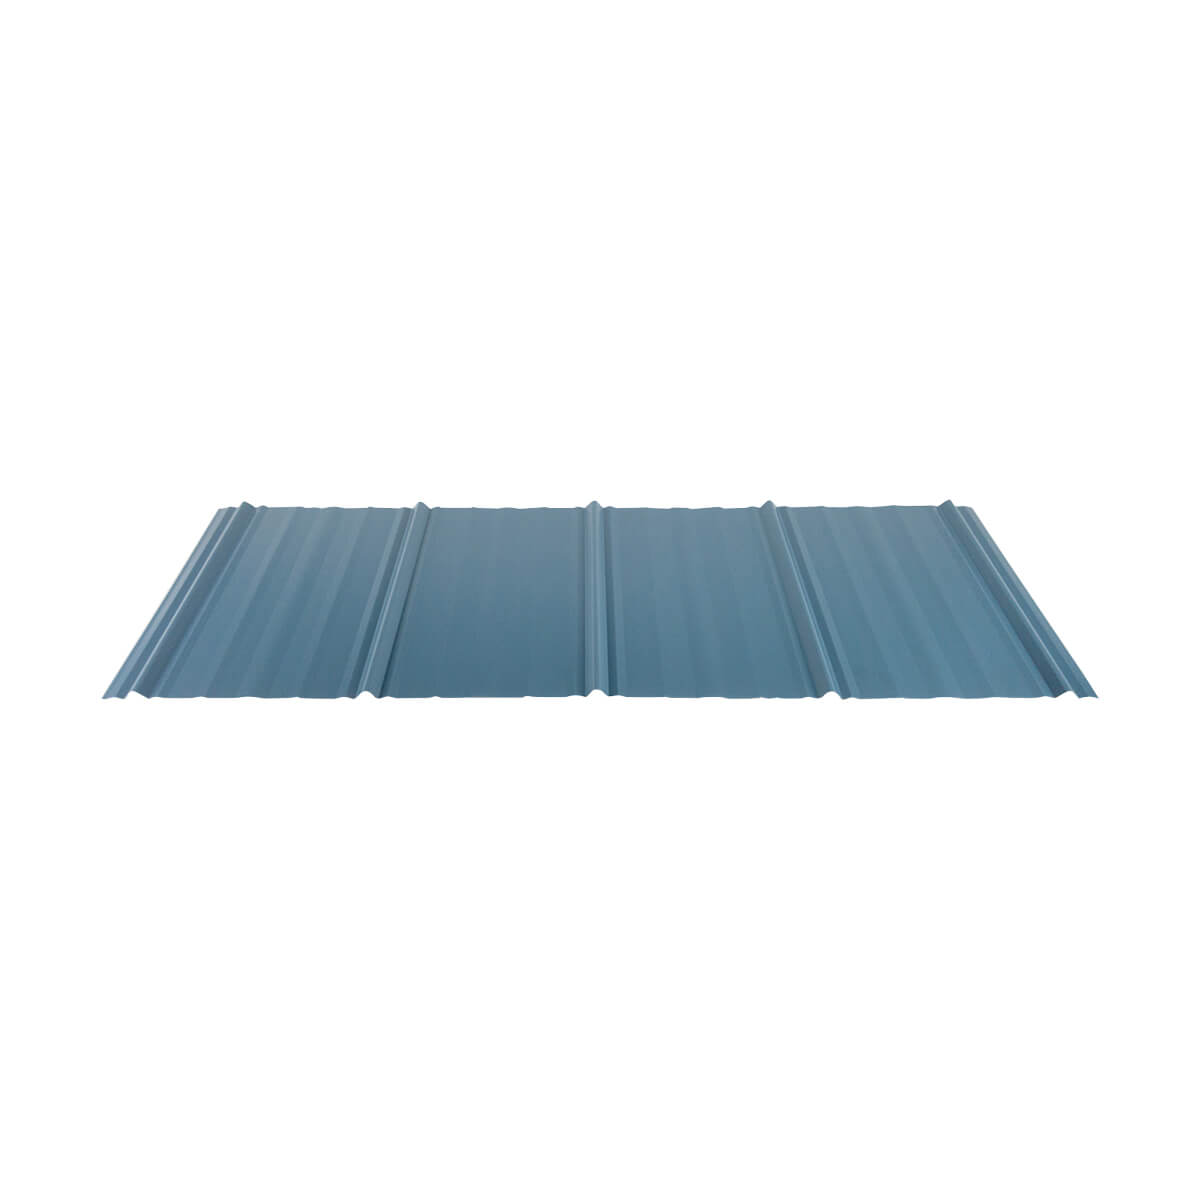 WeatherShield 1 Metal Sheets or Panels - 32-in x 12-ft